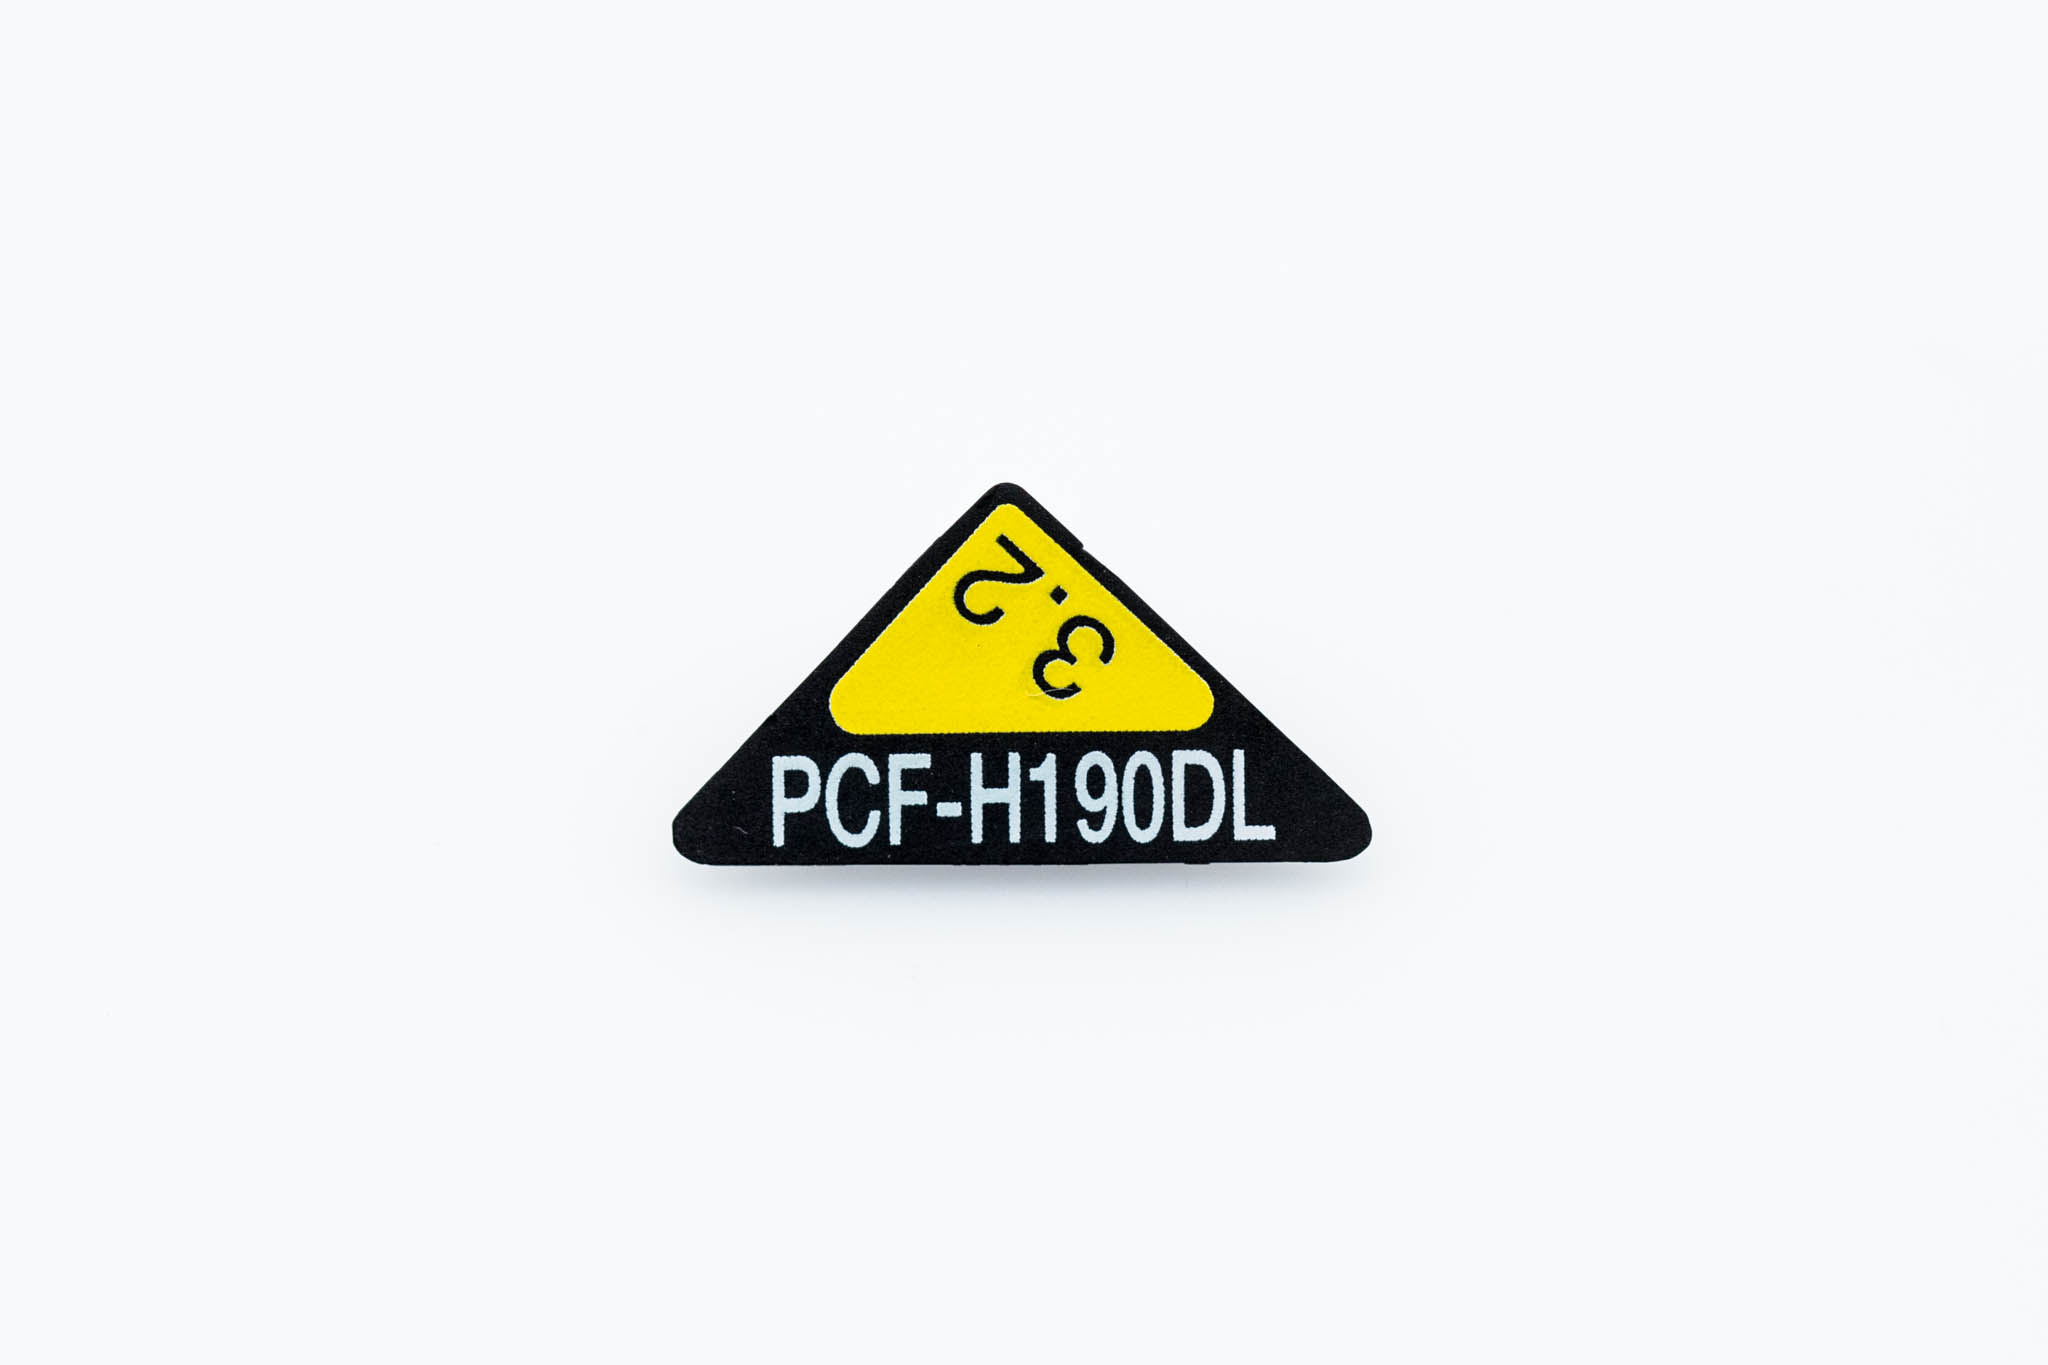 OEM Nameplate: Control Grip - PCF-H190DL